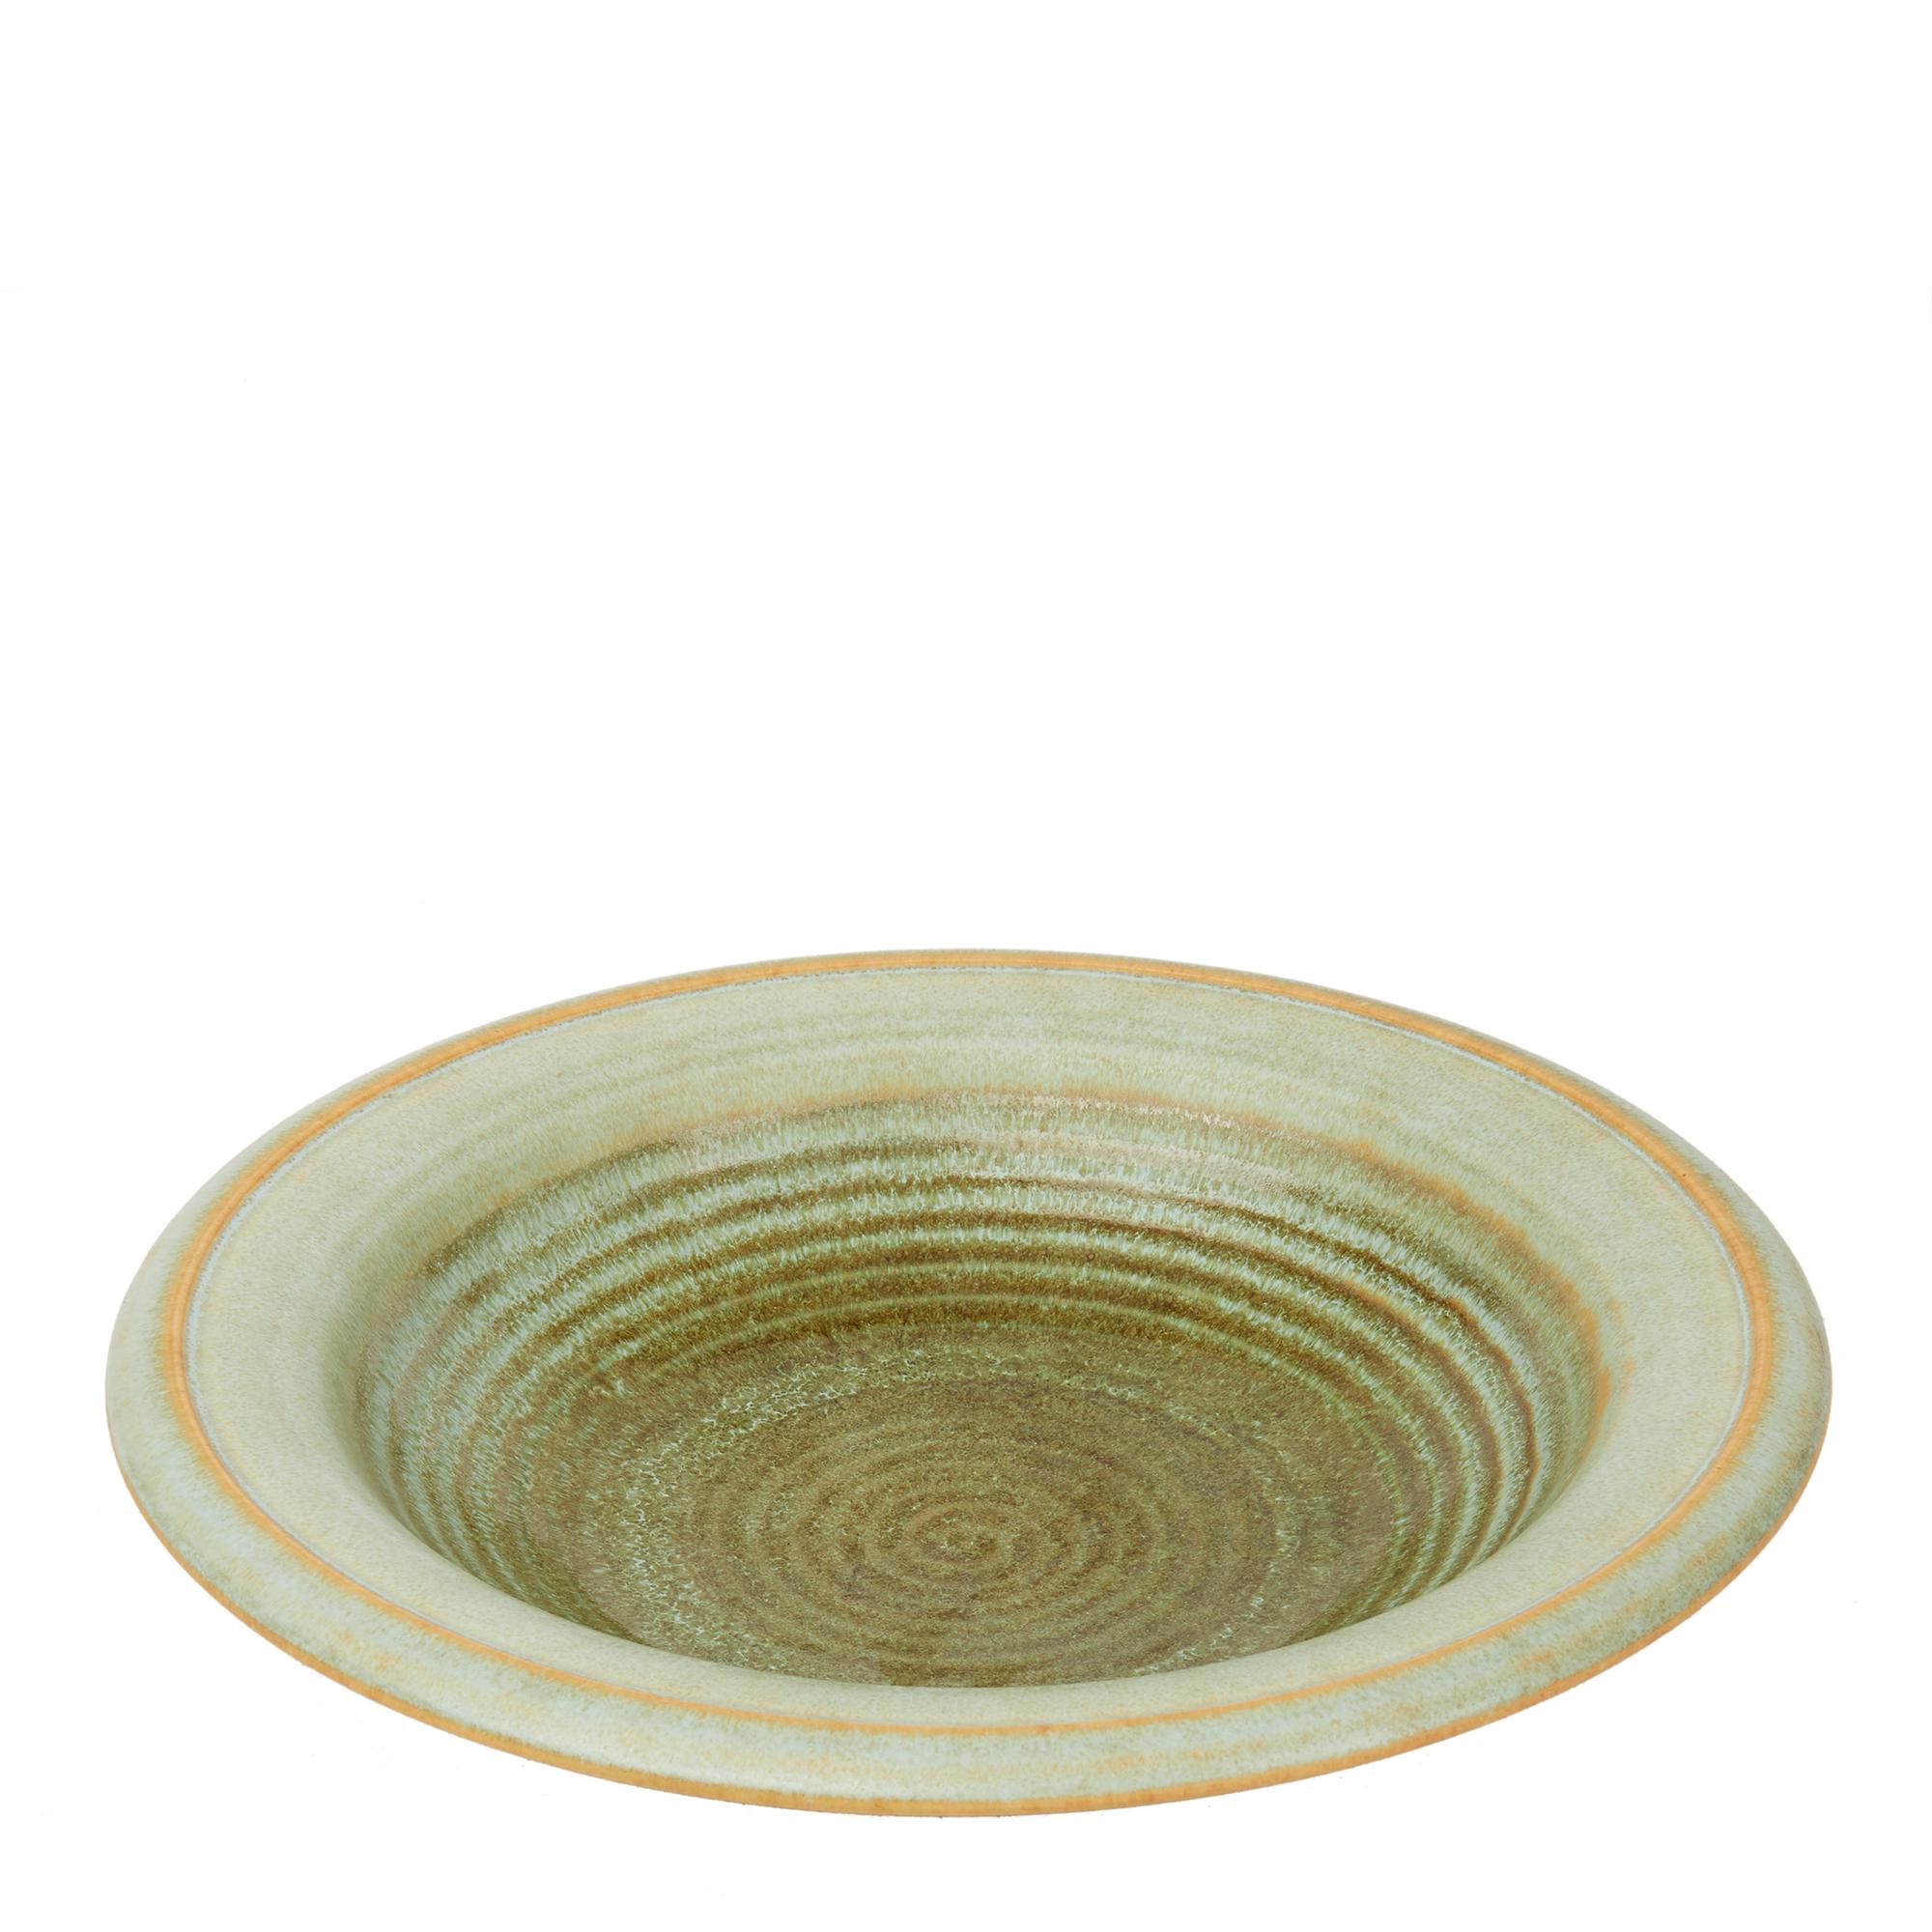 A stylish Modernist midcentury Italian art pottery bowl designed by Franco Bucci for Labortorio Pesaro. The rounded handcrafted stoneware bowl stands on a narrow round unglazed foot and is if wide shallow shape with a wide flat rimmed edge. The body